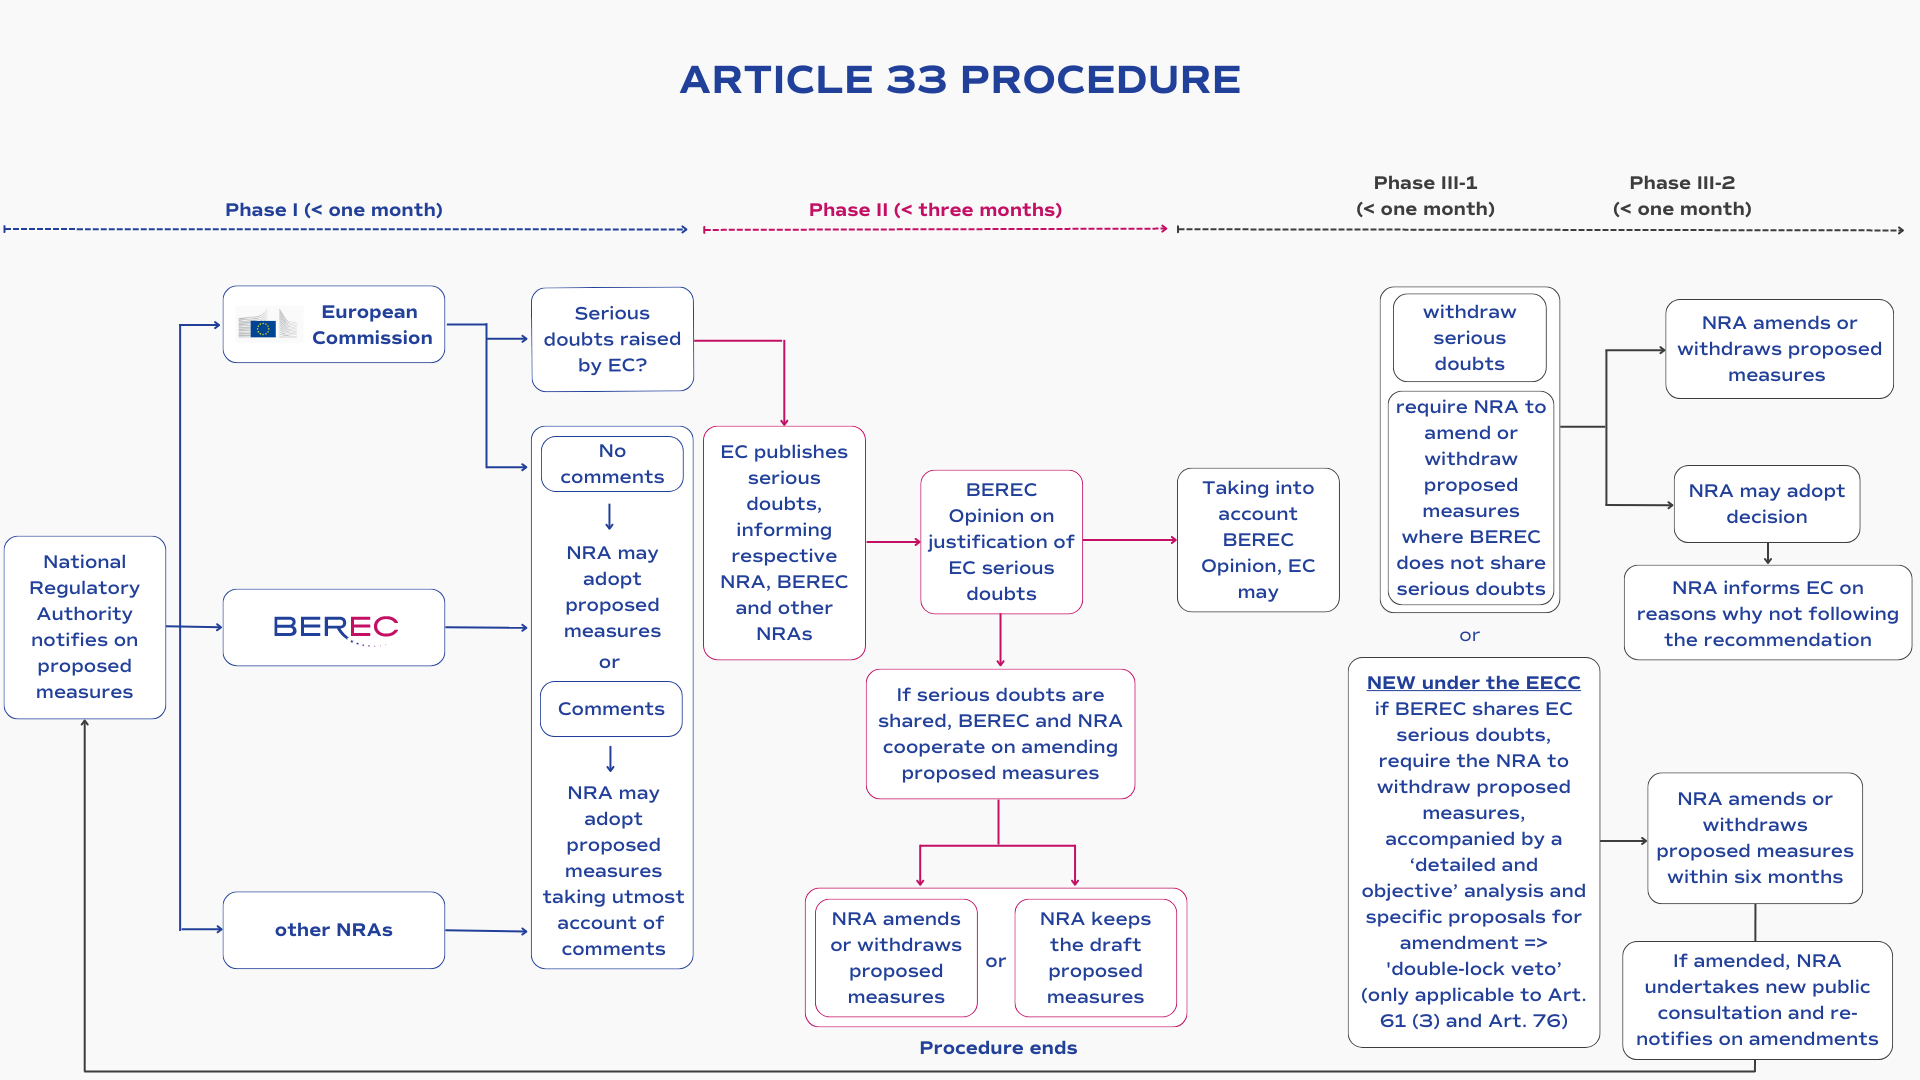 The image includes a flow-chart of the Article 33 procedure, described in text form on this web page.